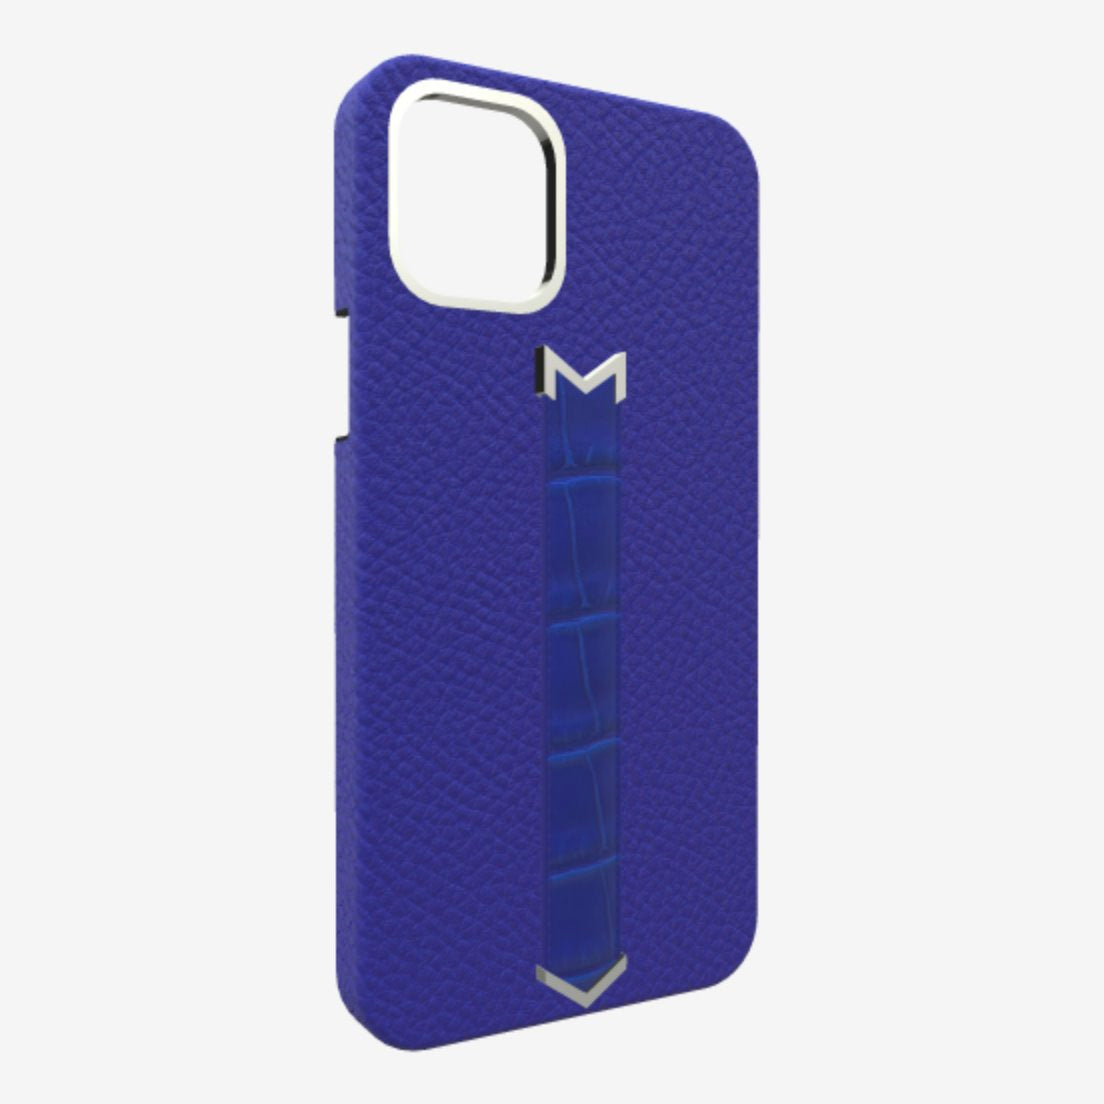 Silver Finger Strap Case for iPhone 13 Pro Max in Genuine Calfskin and Alligator Electric-Blue Electric-Blue 